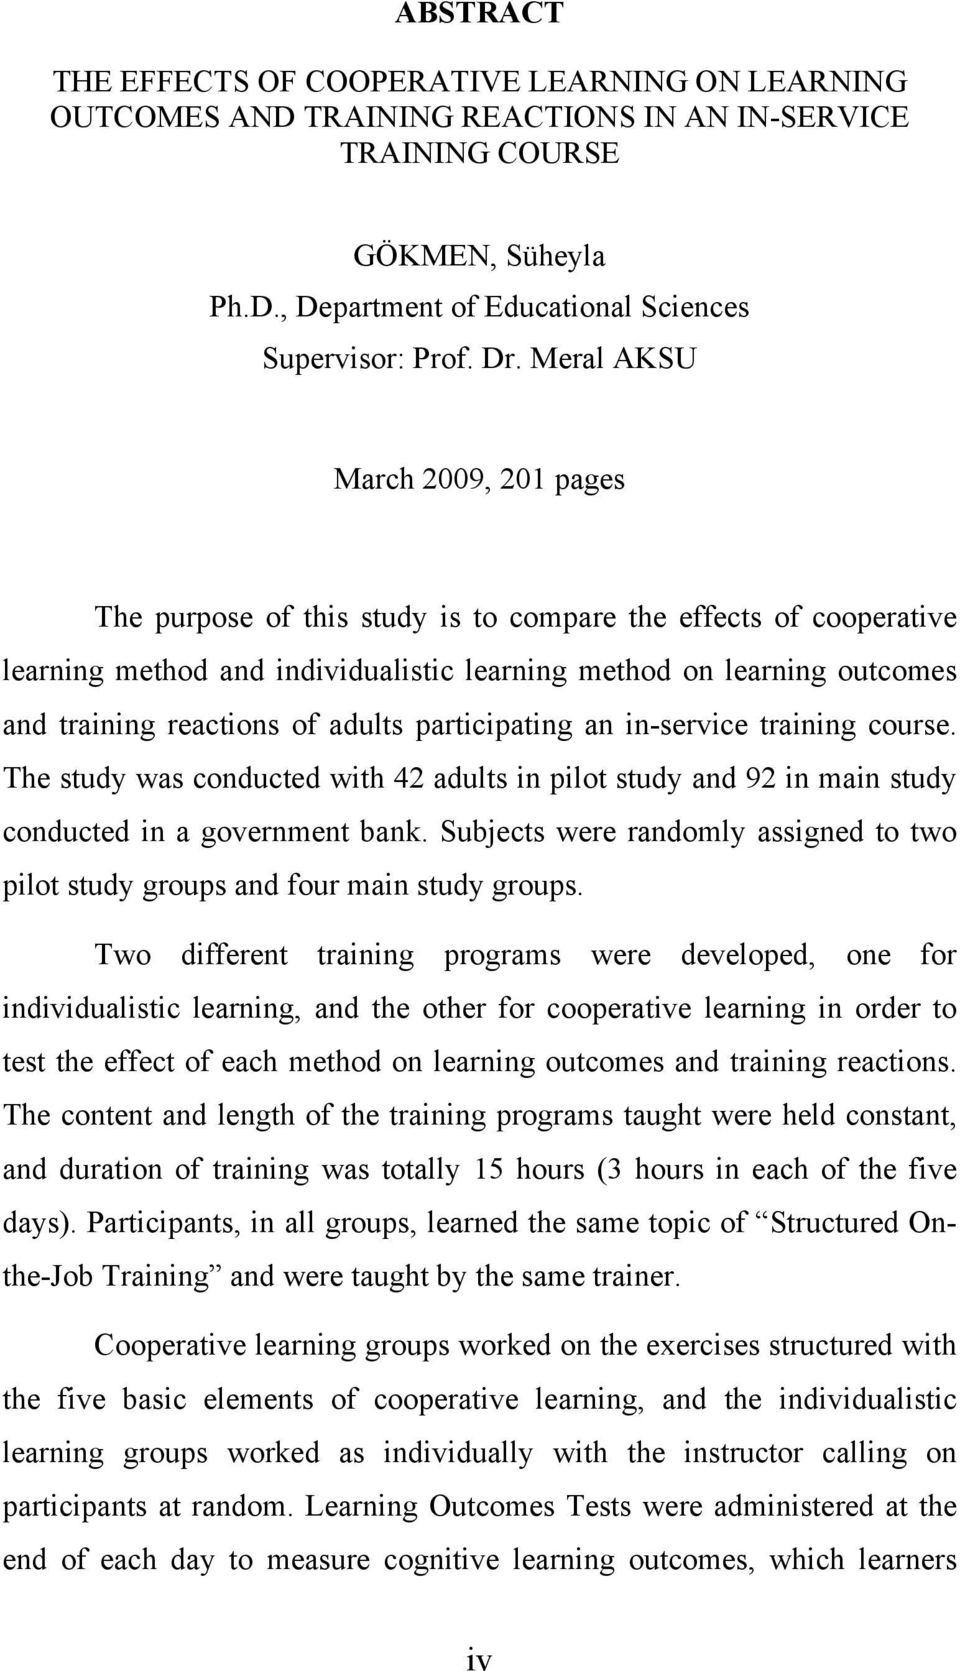 of adults participating an in-service training course. The study was conducted with 42 adults in pilot study and 92 in main study conducted in a government bank.